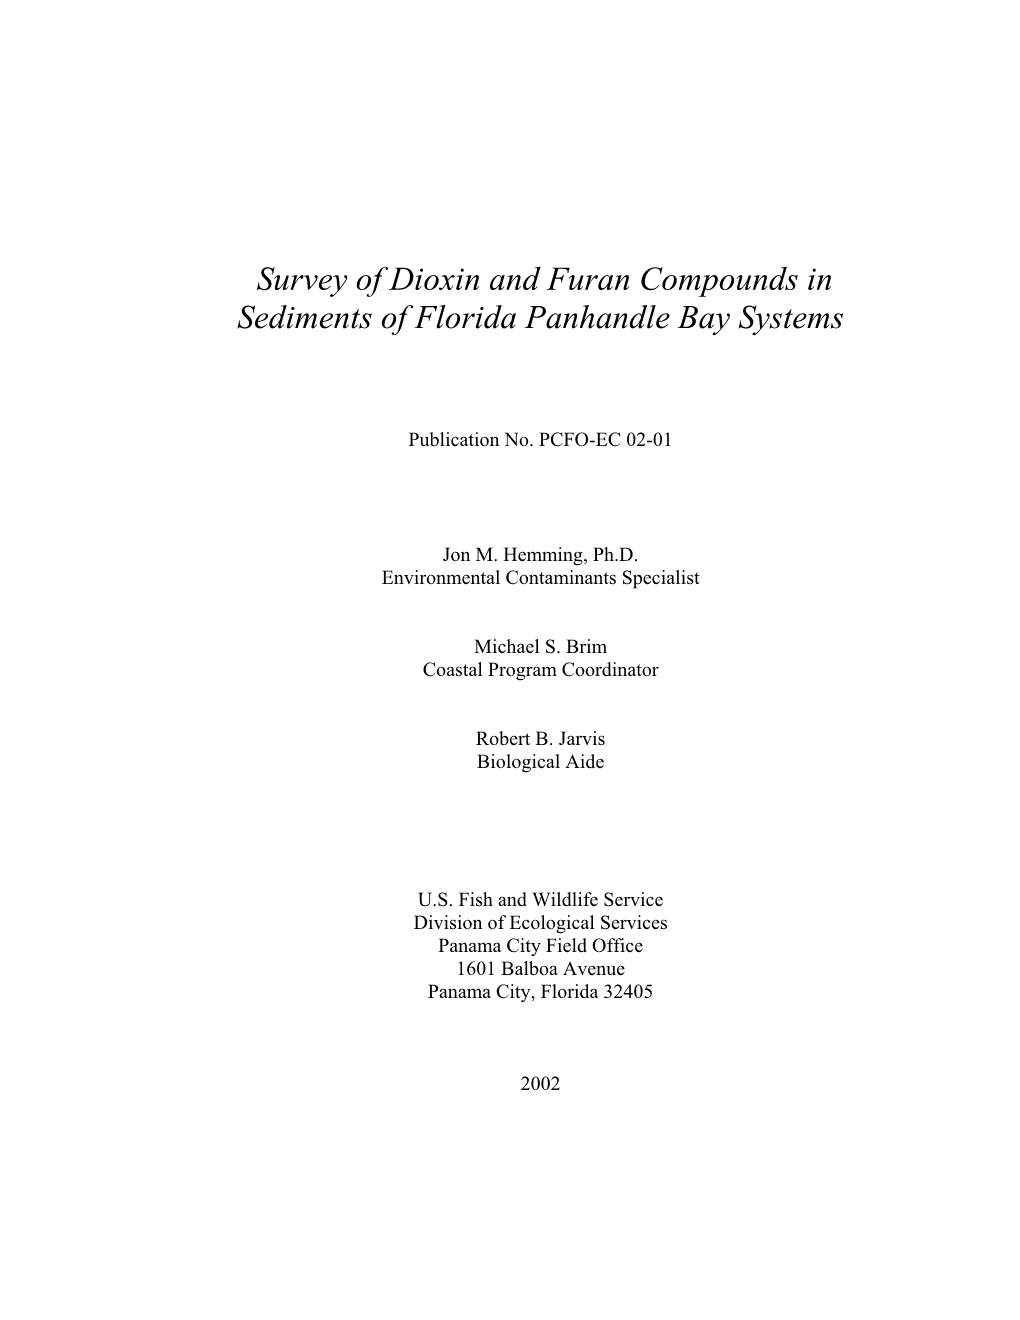 Survey of Dioxin and Furan Compounds in Sediments of Florida Panhandle Bay Systems